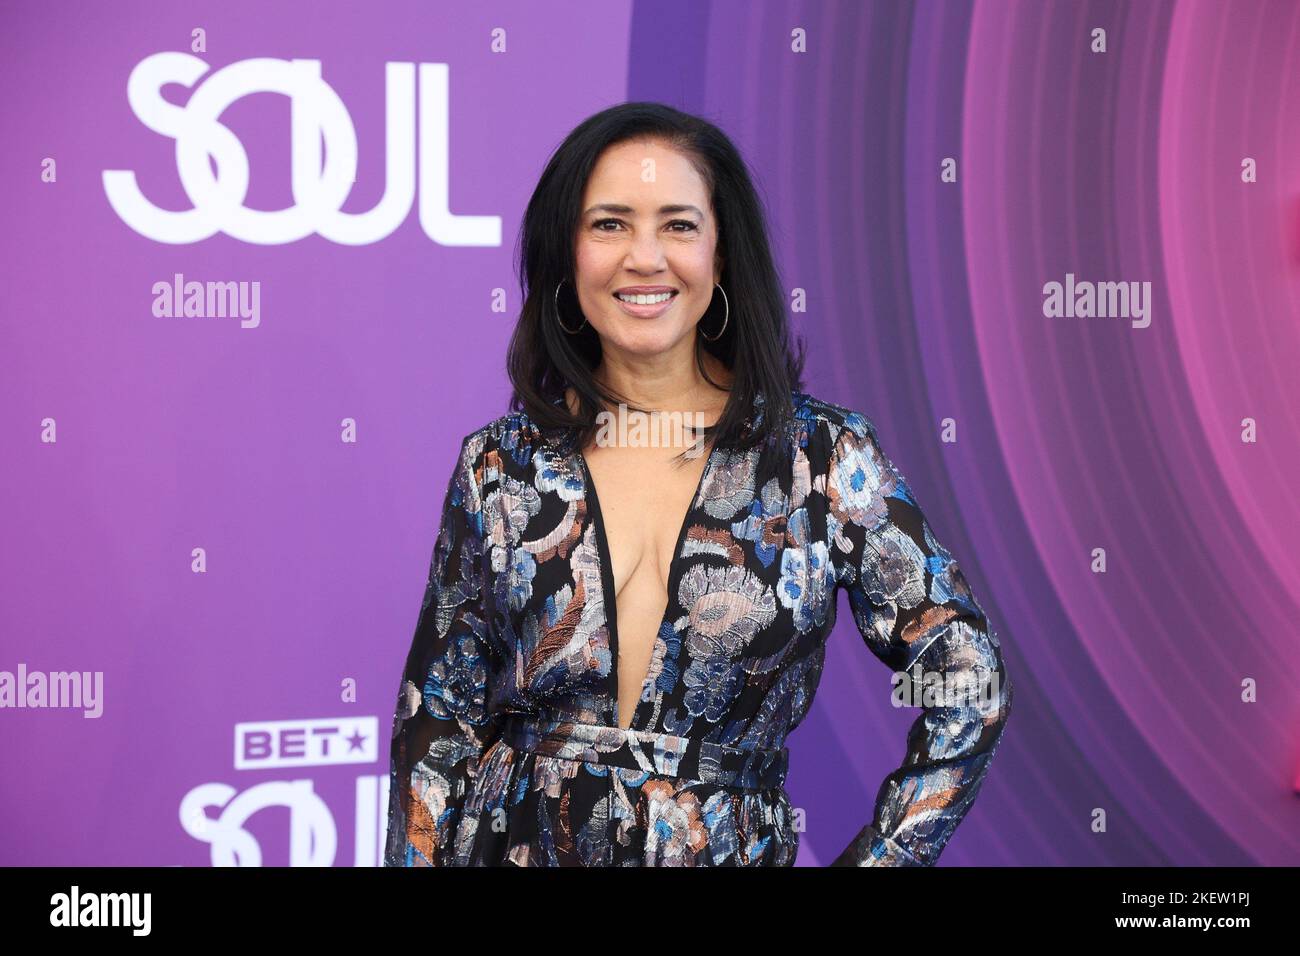 Las Vegas, NV, USA. 13th Nov, 2022. EVP, Programming Operations & Business and Legal Affairs for BET Nadja Webb at arrivals for Soul Train Awards 2022 - Part 1, Orleans Arena at Orleans Hotel and Casino, Las Vegas, NV November 13, 2022. Credit: JA/Everett Collection/Alamy Live News Stock Photo